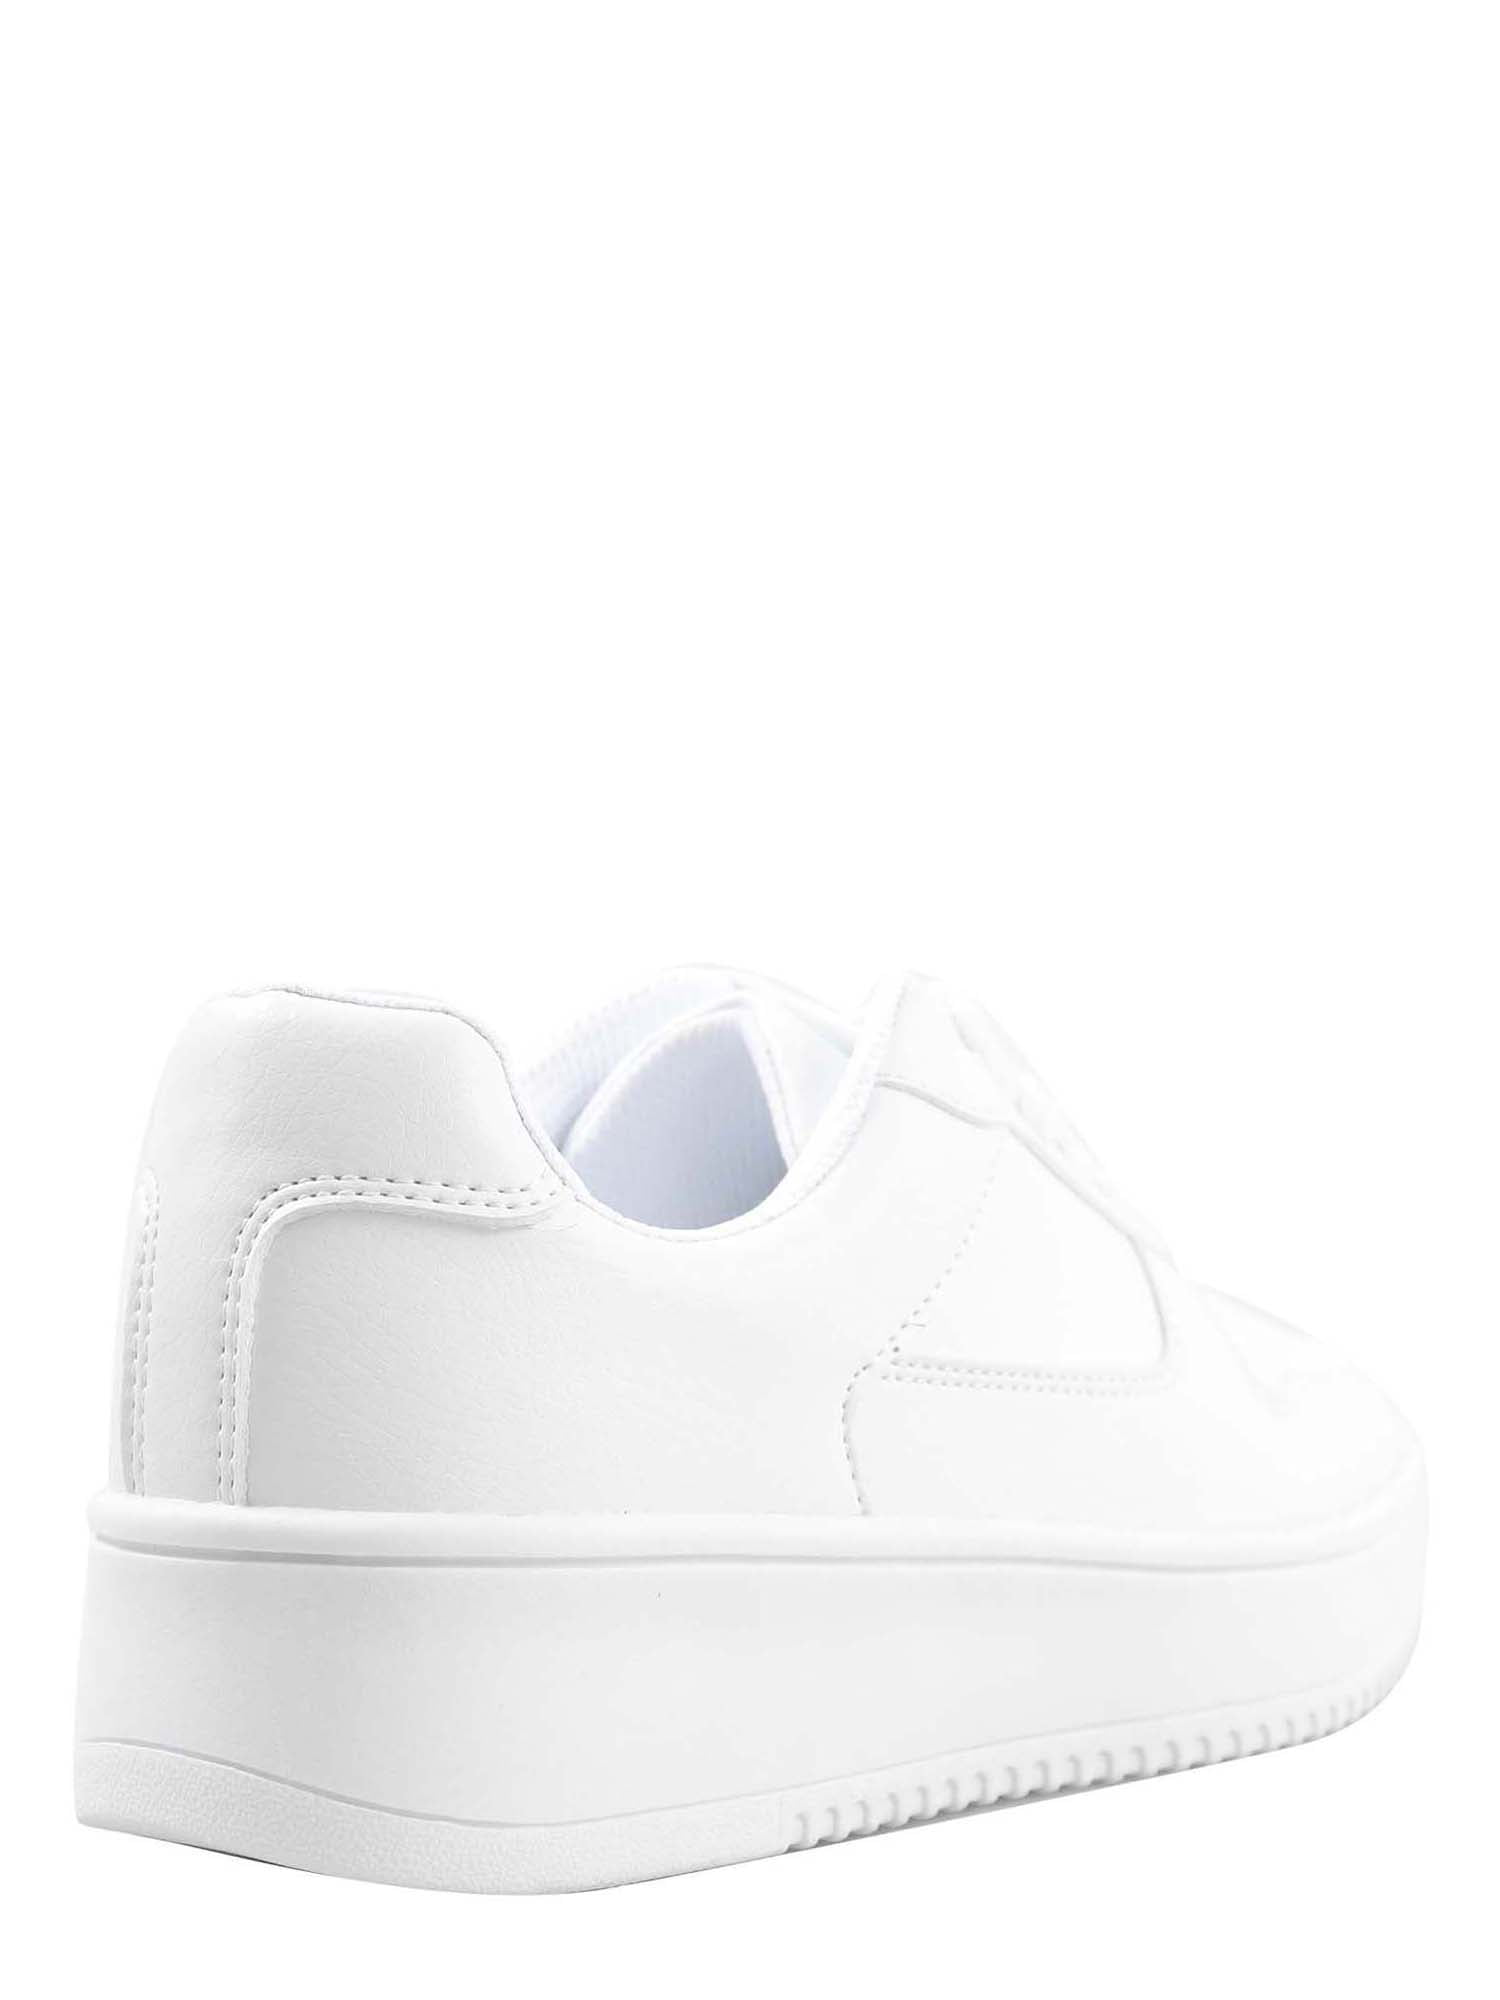  Time and Tru Women's White Platform Sneakers | Shoes